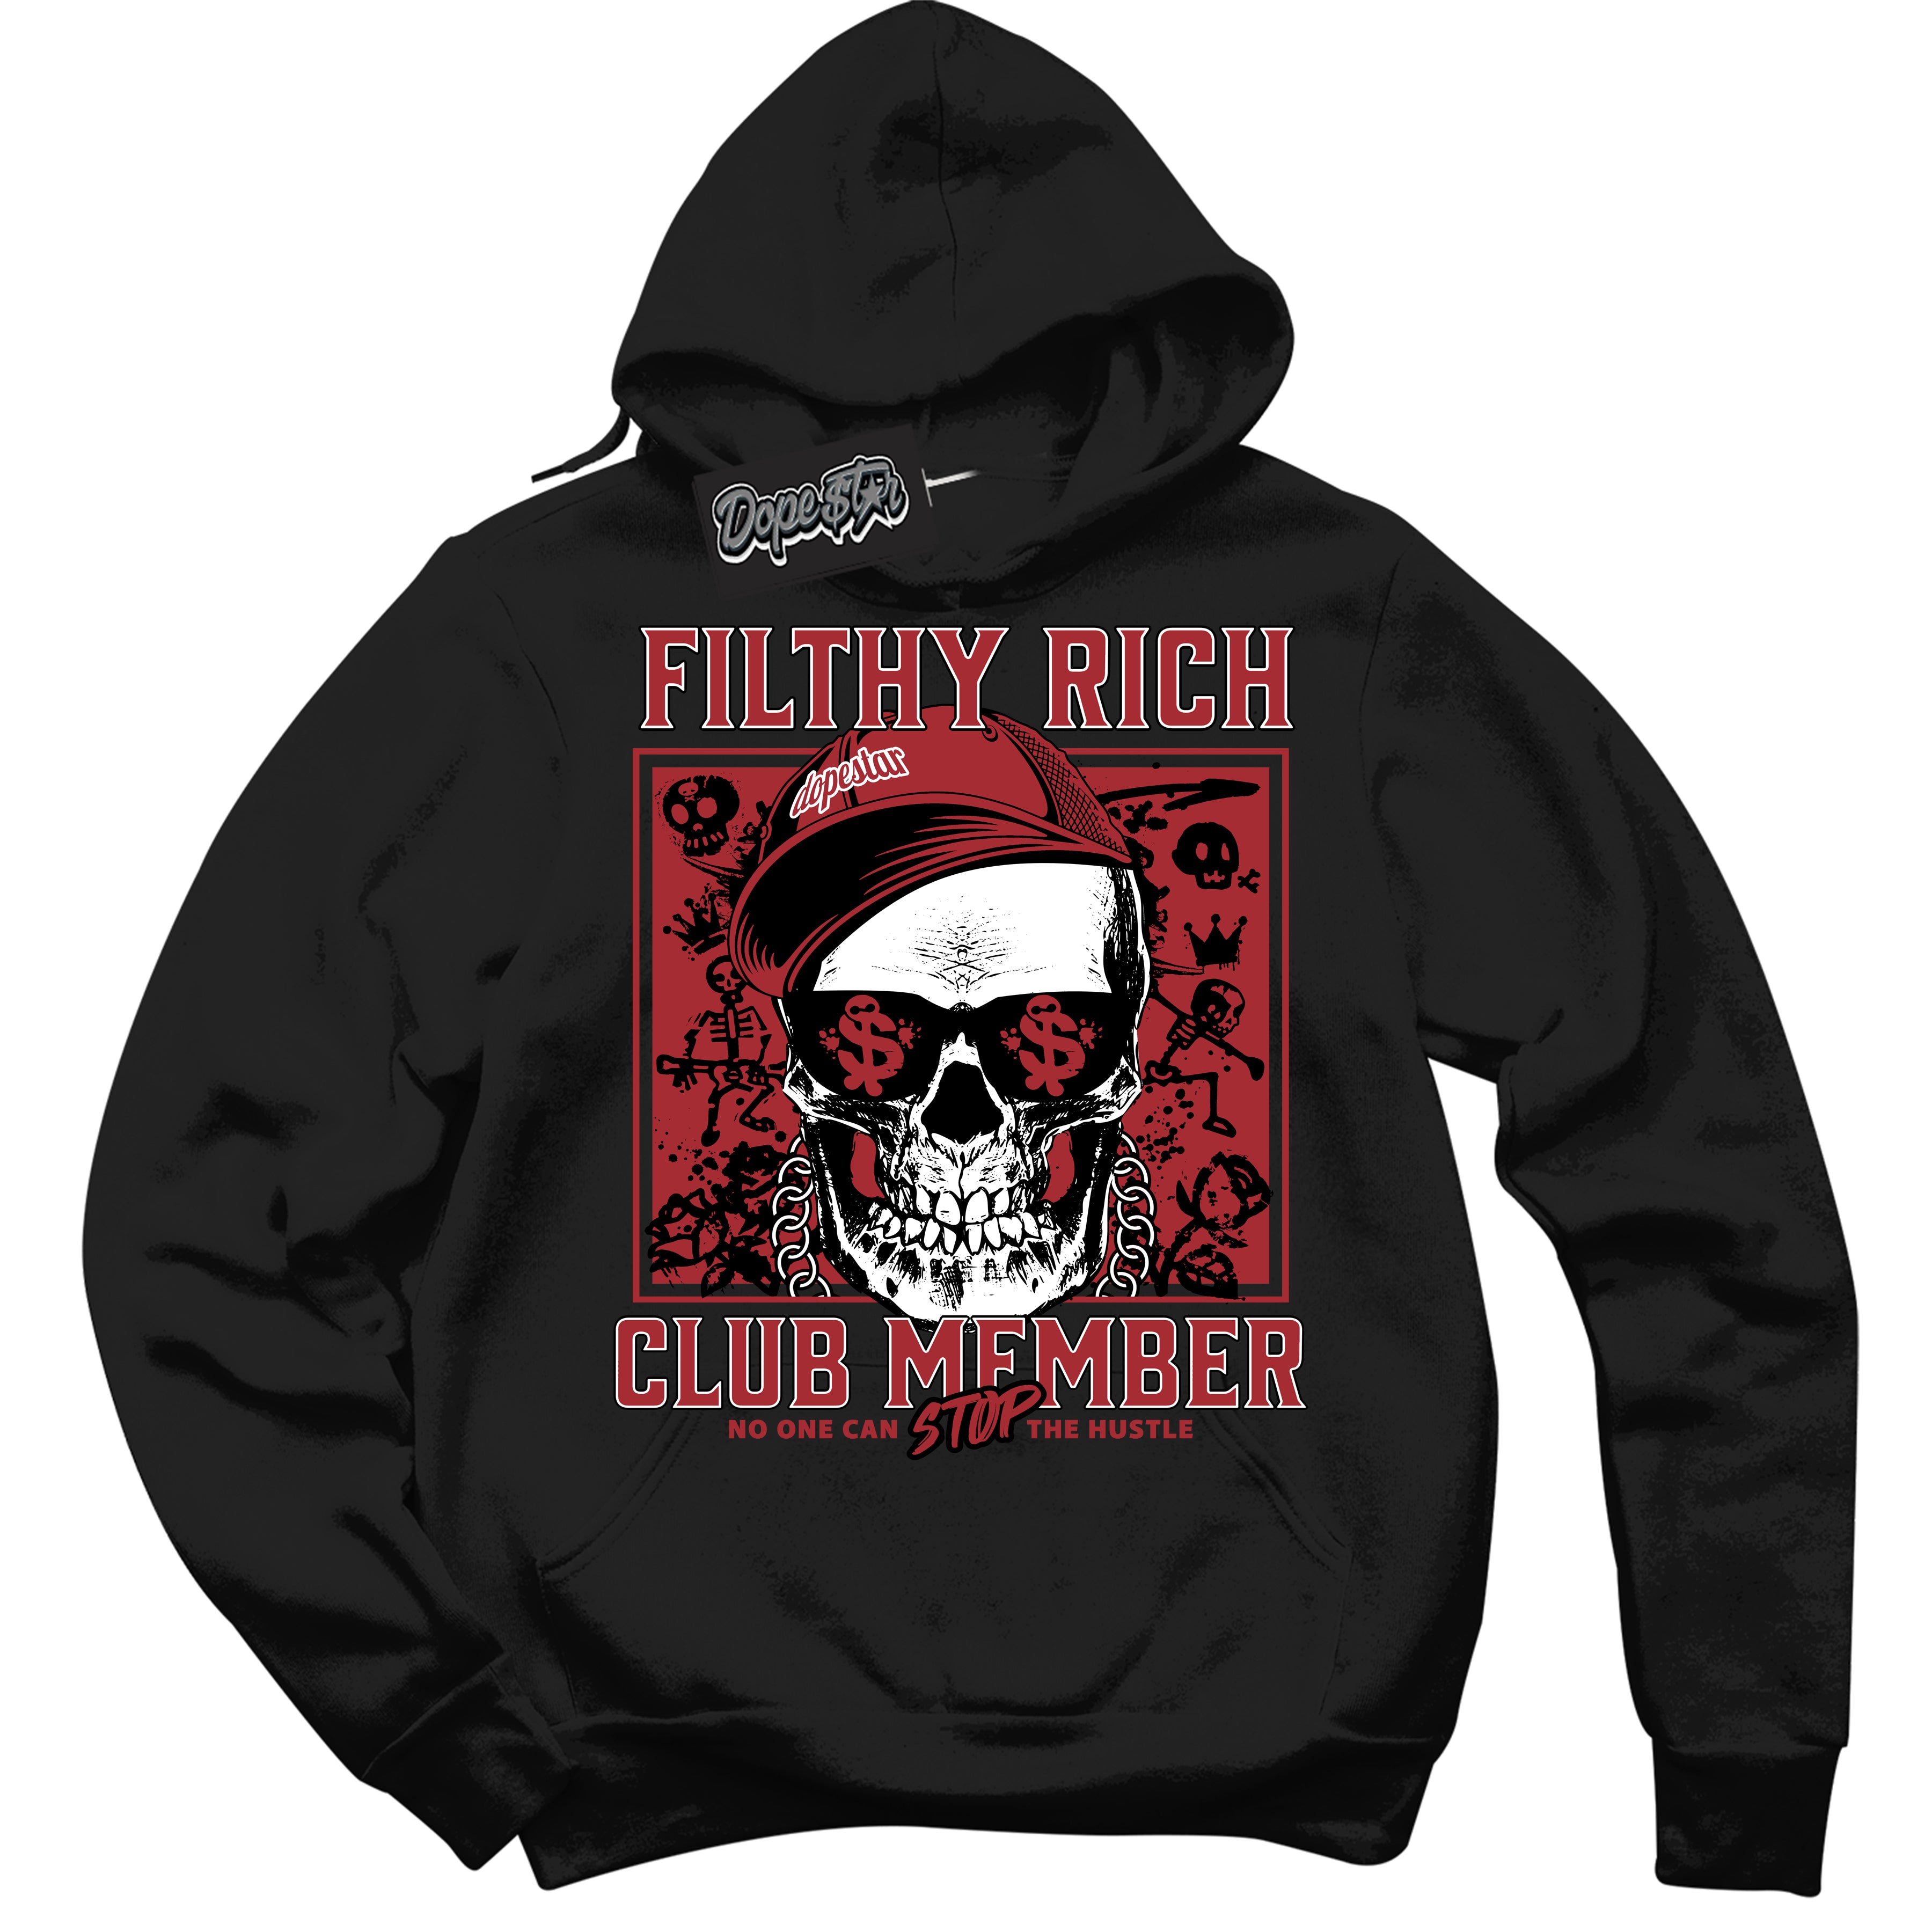 Cool Black Hoodie with “ Filthy Rich ”  design that Perfectly Matches Pro J Pack Chicago Sneakers.